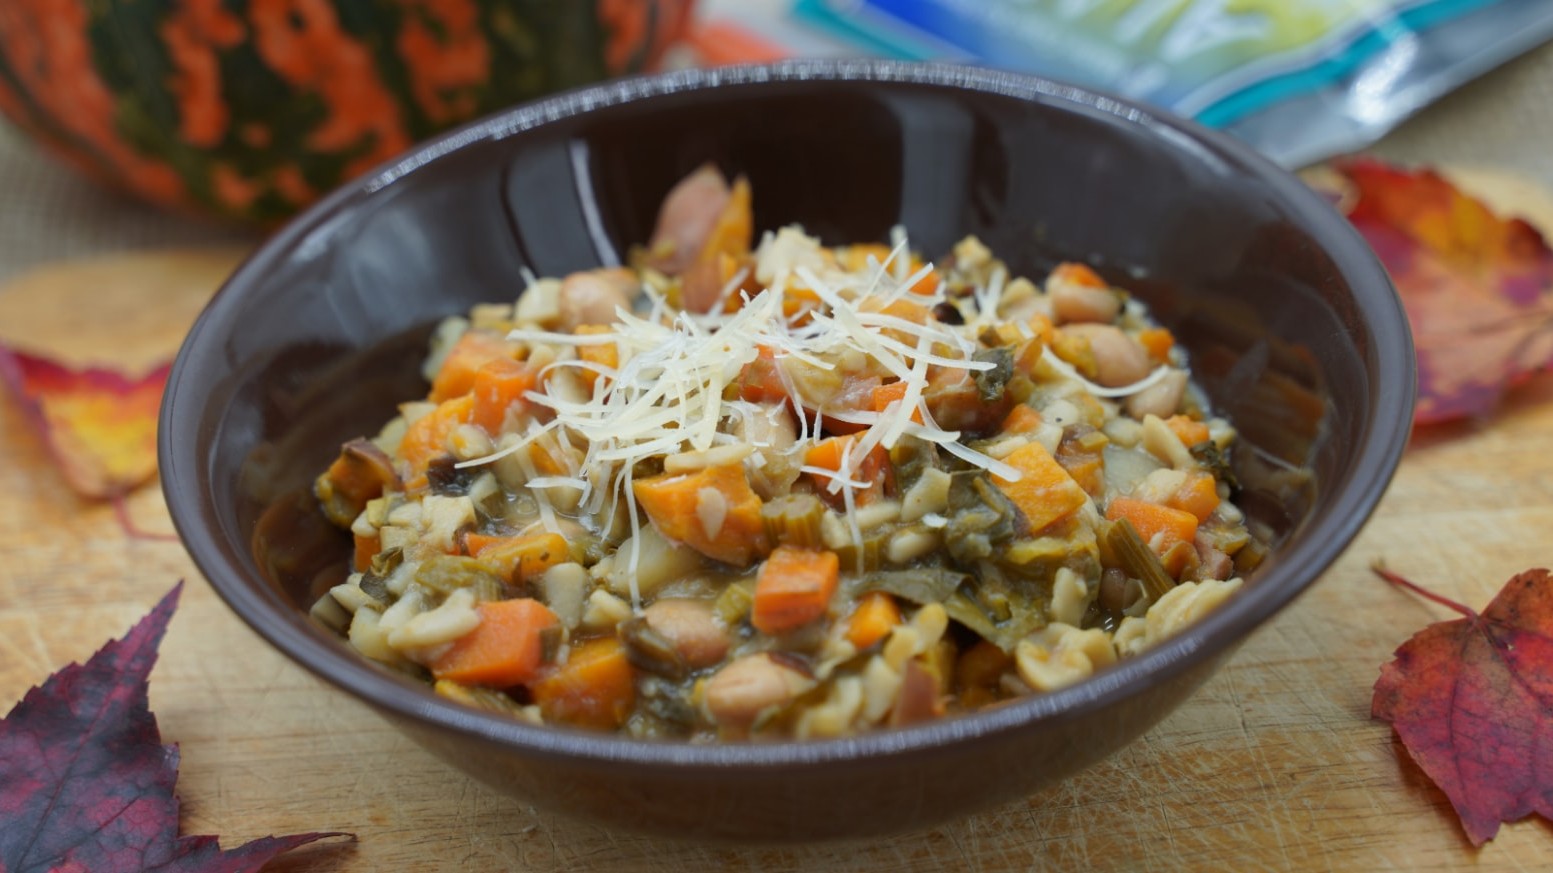 Image of Fall Harvest Minestrone Soup with Alaria Recipe